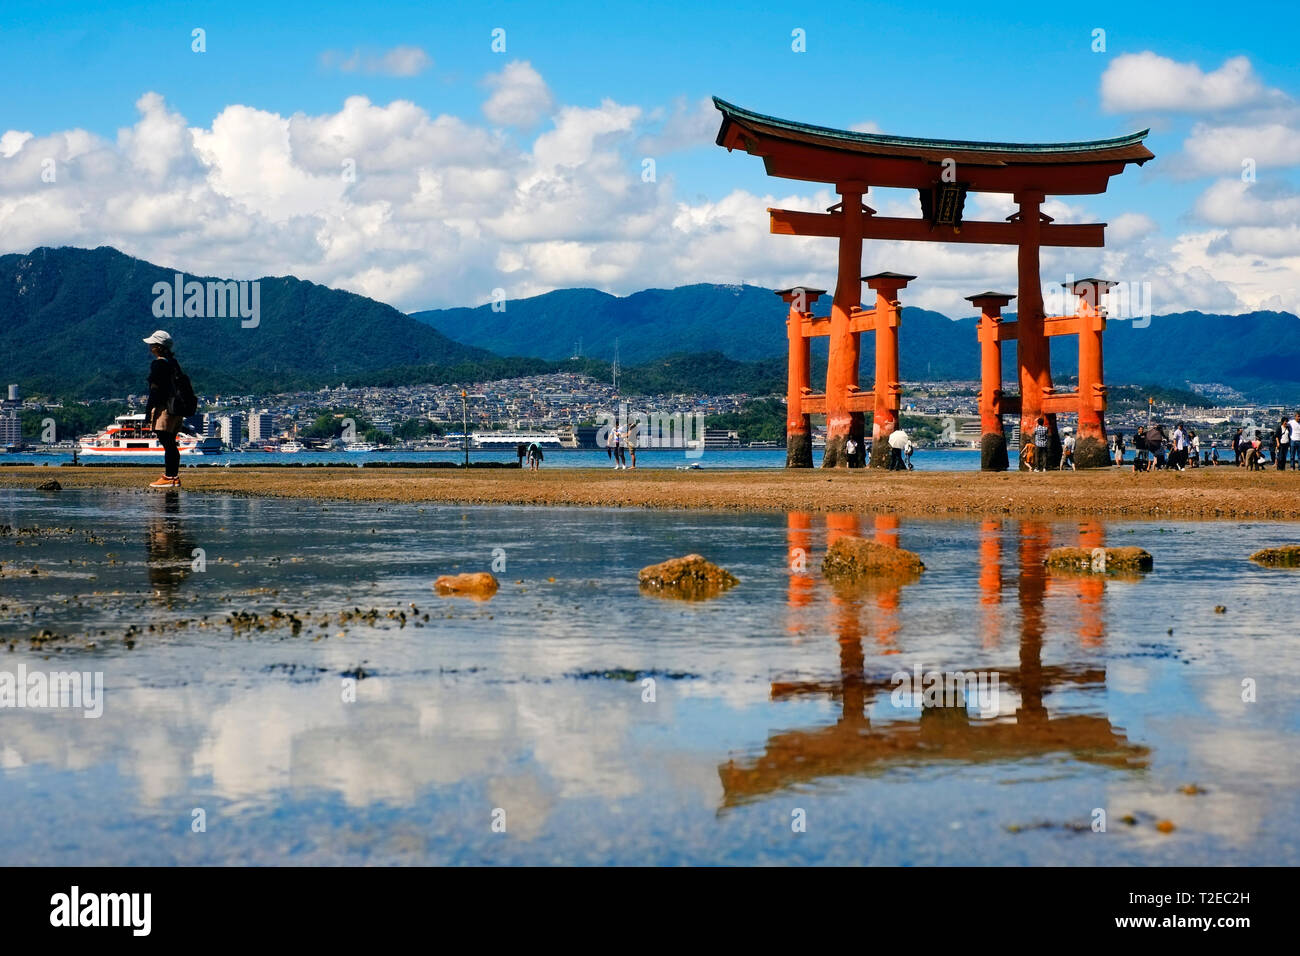 The famous 'floating' torii gate of Itsukushima Shrine on the island of Miyajima, Japan. The gate appears to be submerged during high tide. Stock Photo